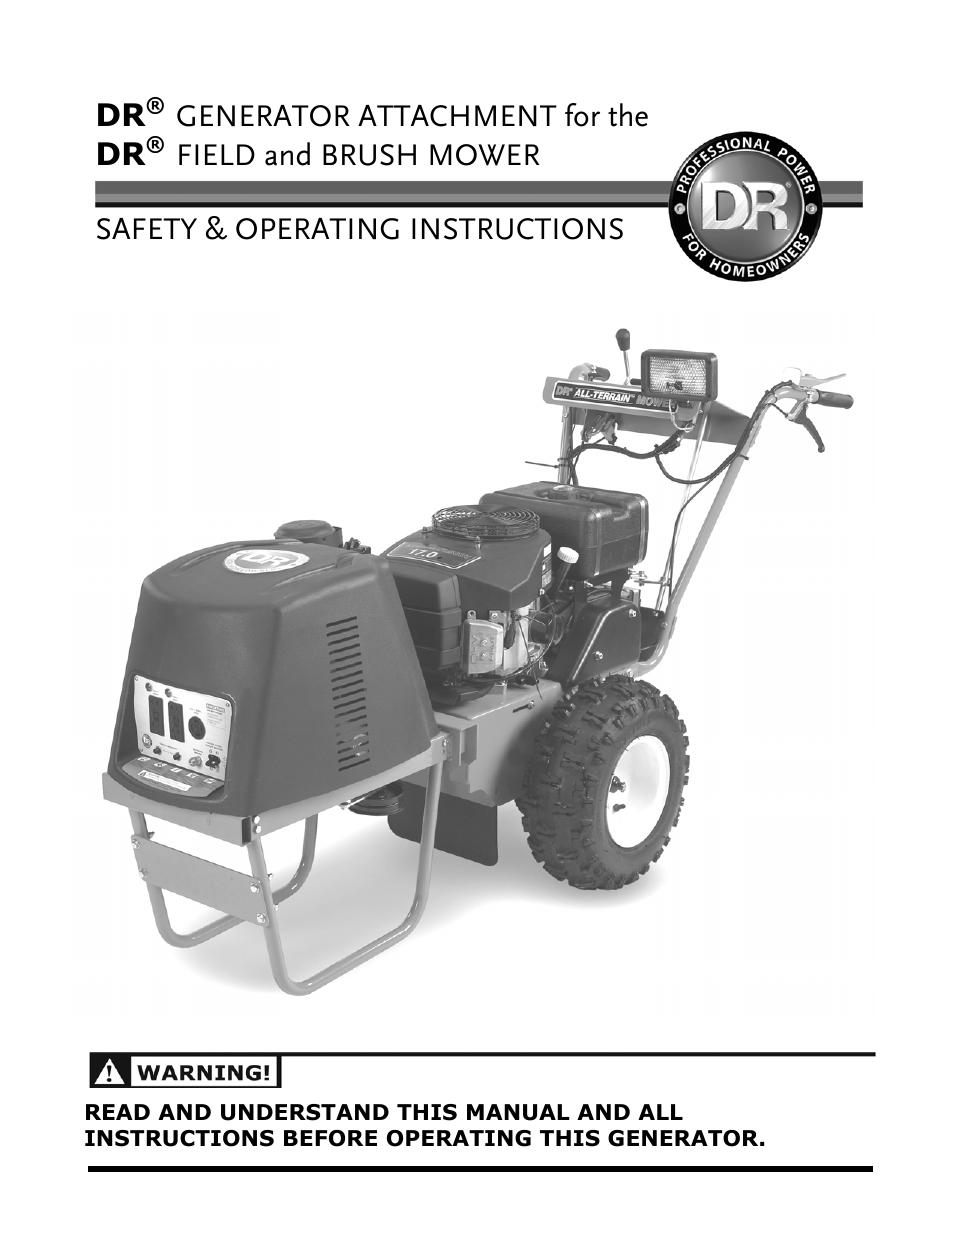 Country Home Products DR ALL-TERRAIN FIELD and BRUSH MOWER User Manual